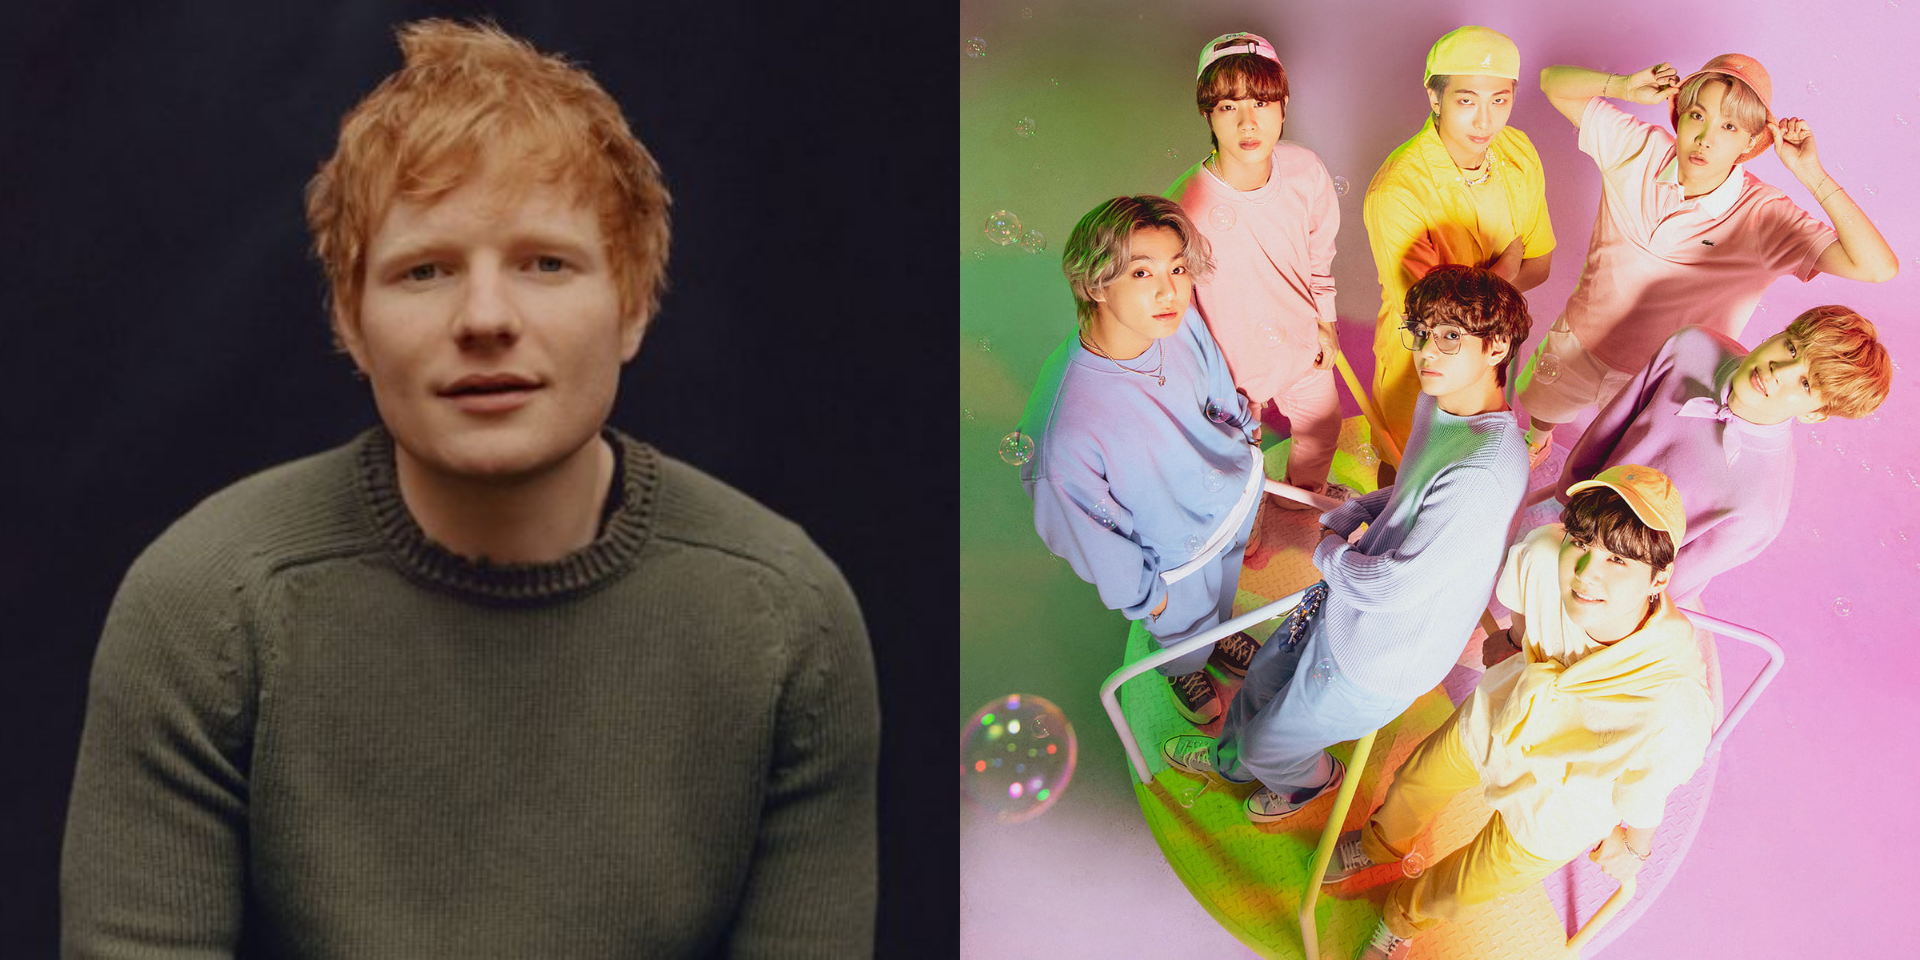 Ed Sheeran reunites with BTS for new song: "I've just written a song for their new record."